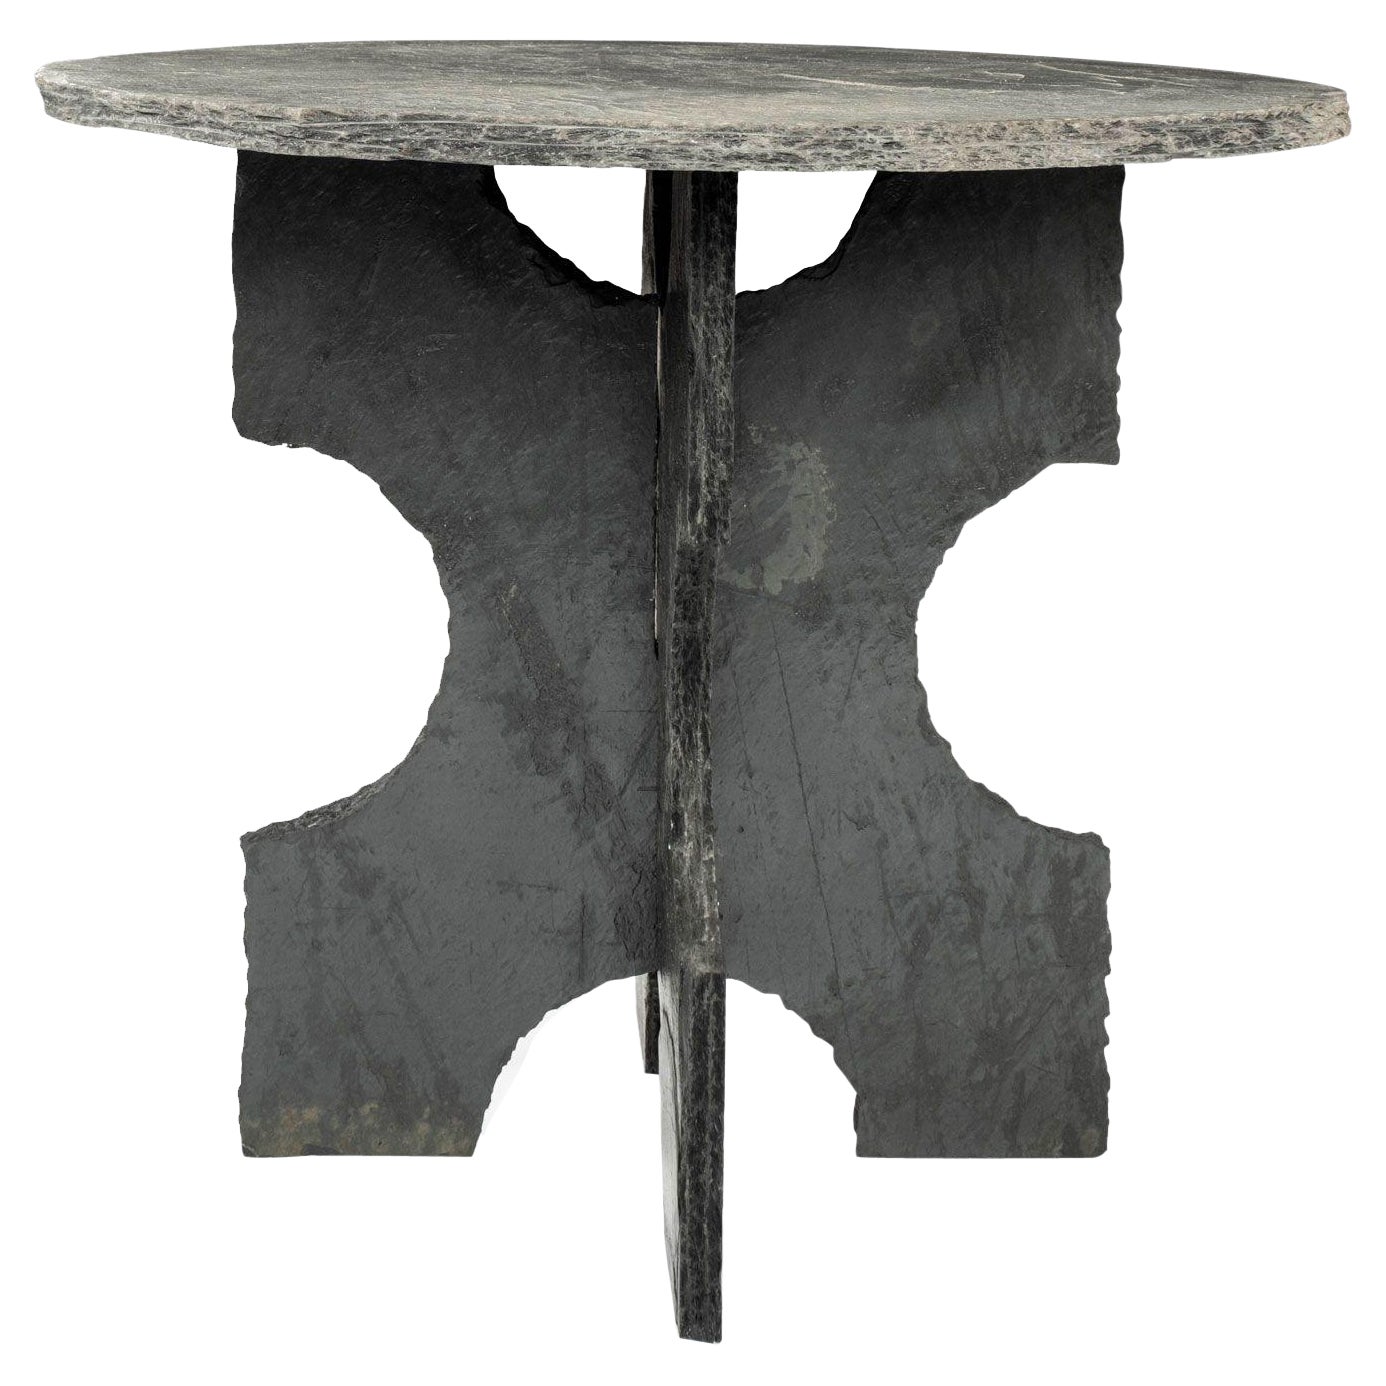 Large Round Riven Slate Table